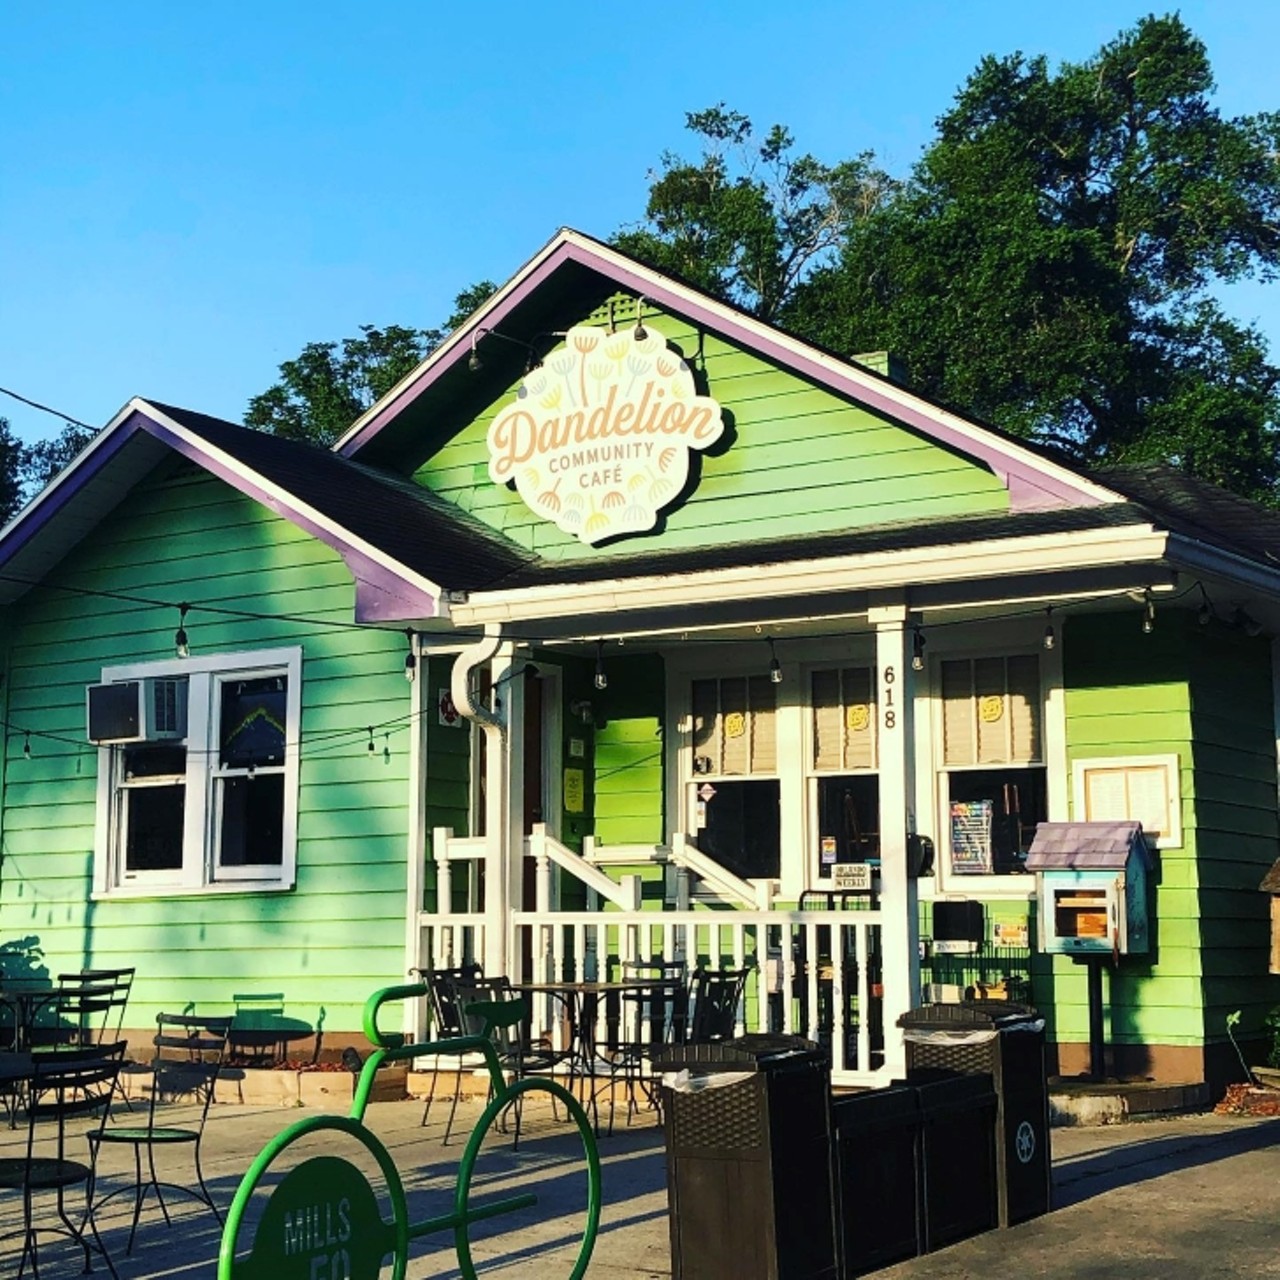 Dandelion Community Cafe 
618 N. Thornton Ave.
Dandelion was a progressive vegan restaurant that served the Orlando community for 14 years. The cafe shut its doors Aug. 11, 2020, in part from COVID-19&#146;s financial impact.
Photo via Dandelion Community Cafe/Facebook